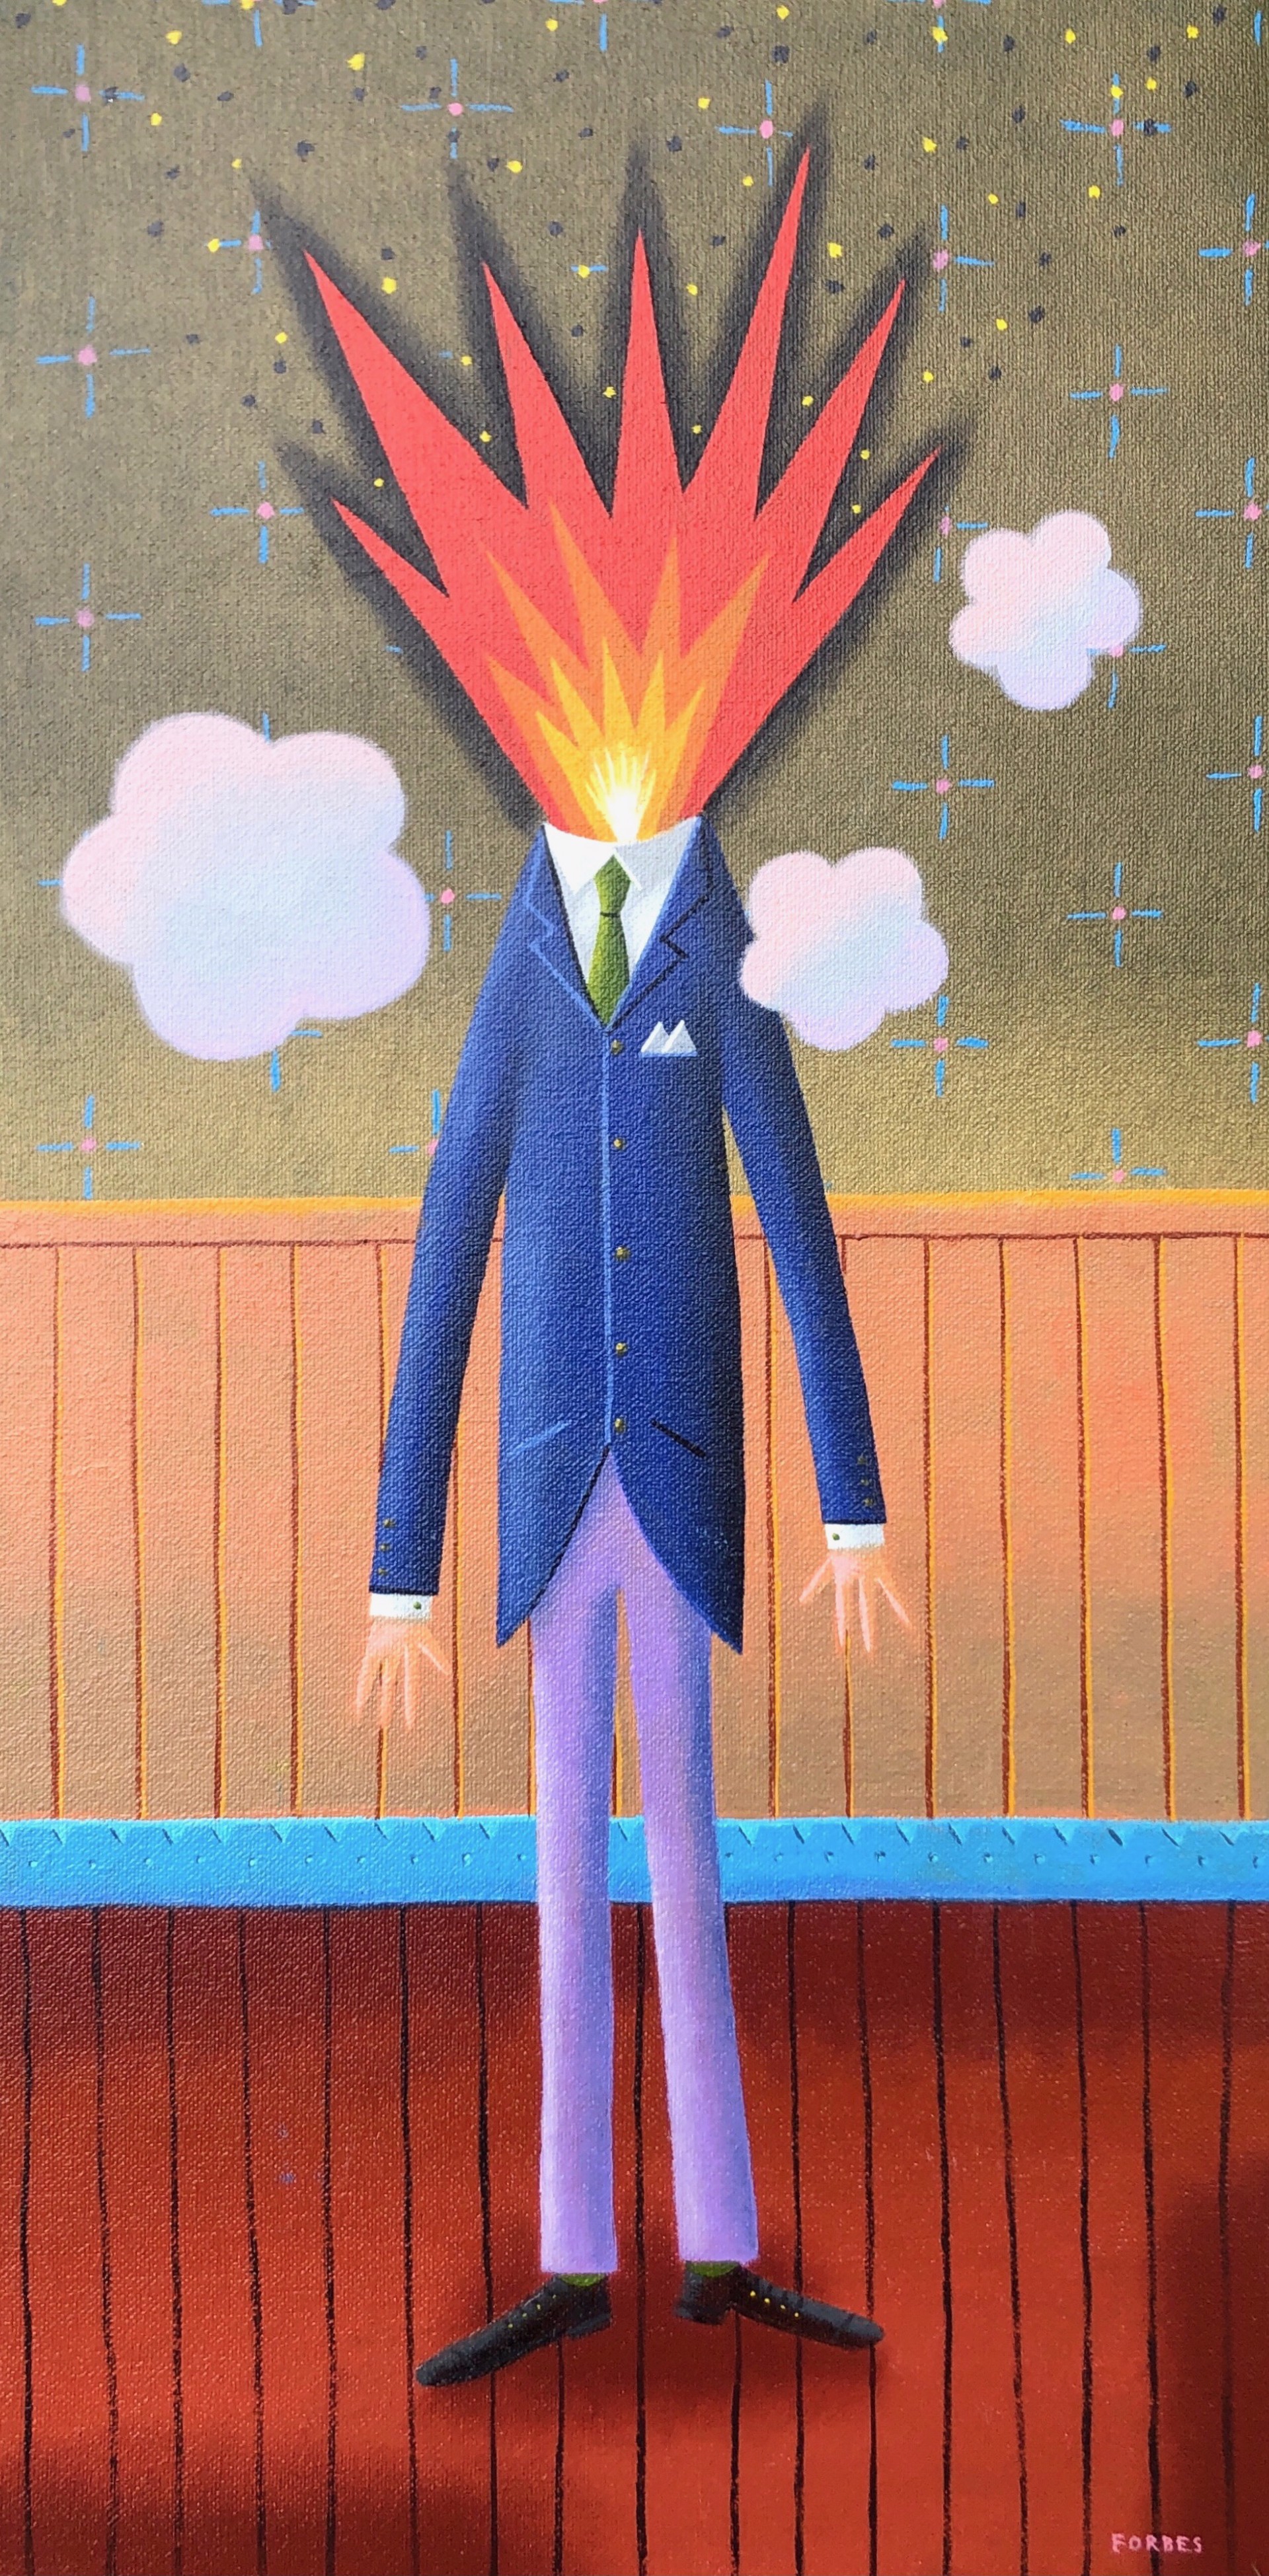 Man With Exploding Head by Rodney Forbes